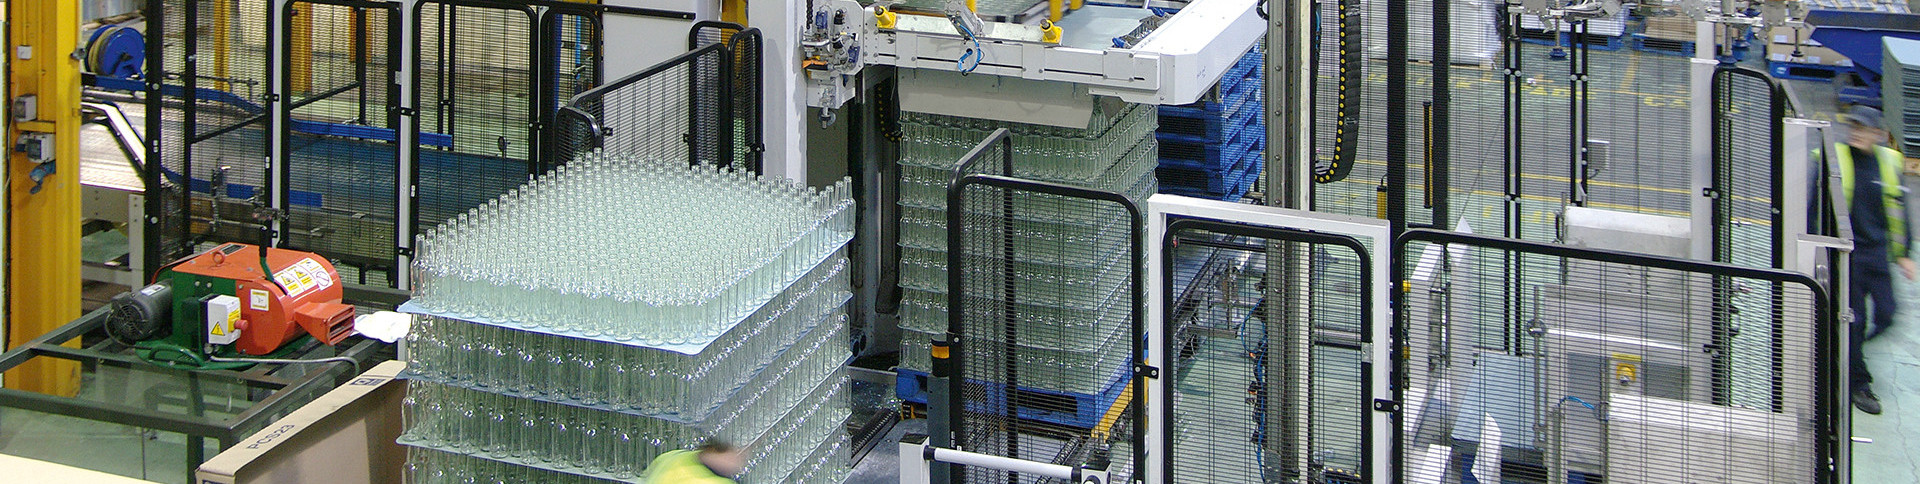 Automated High Low Level Depalletizer for Loose Bottles and Cans | Sweepoff A & B